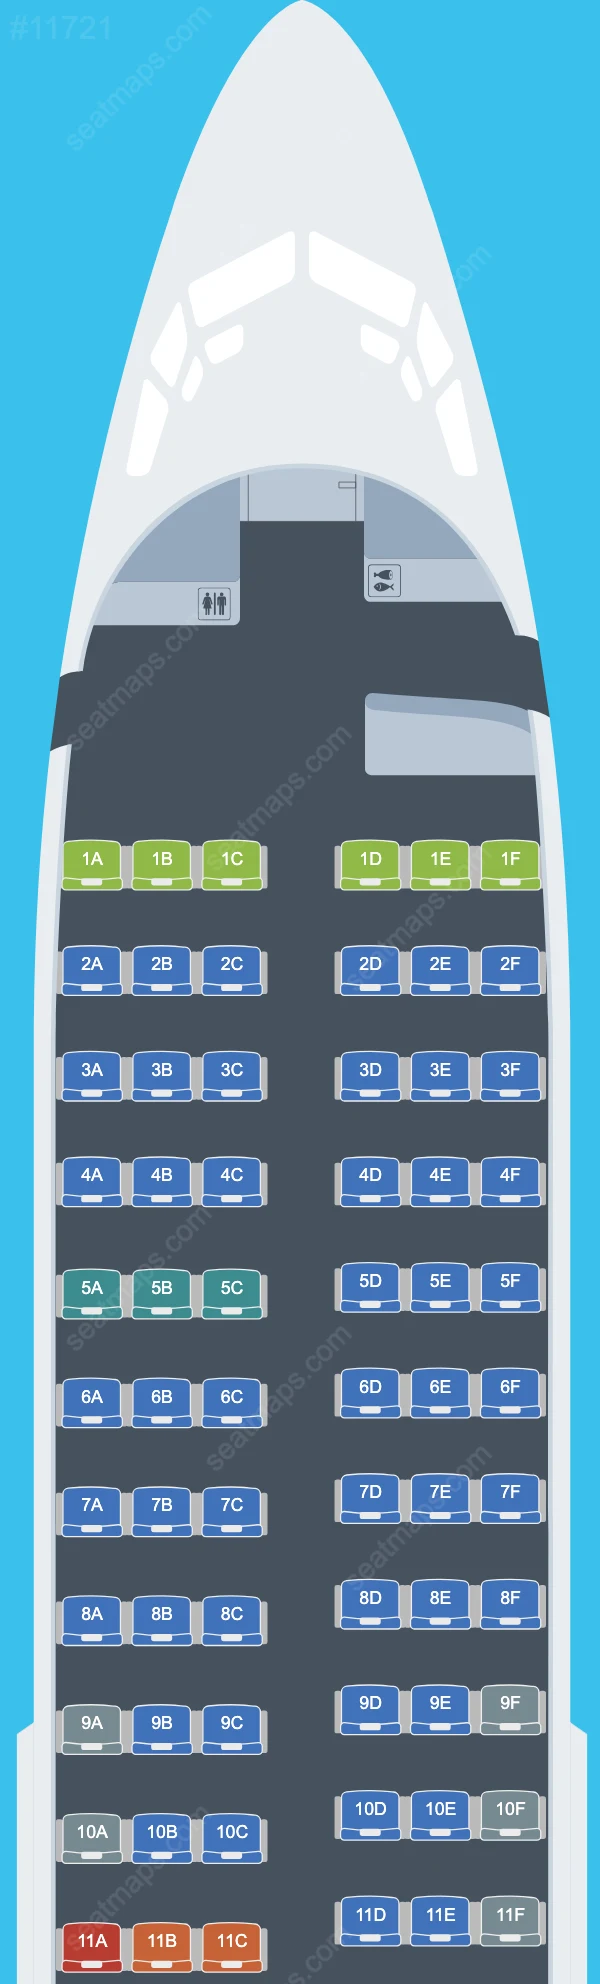 SkyUp MT Boeing 737-700 seatmap preview